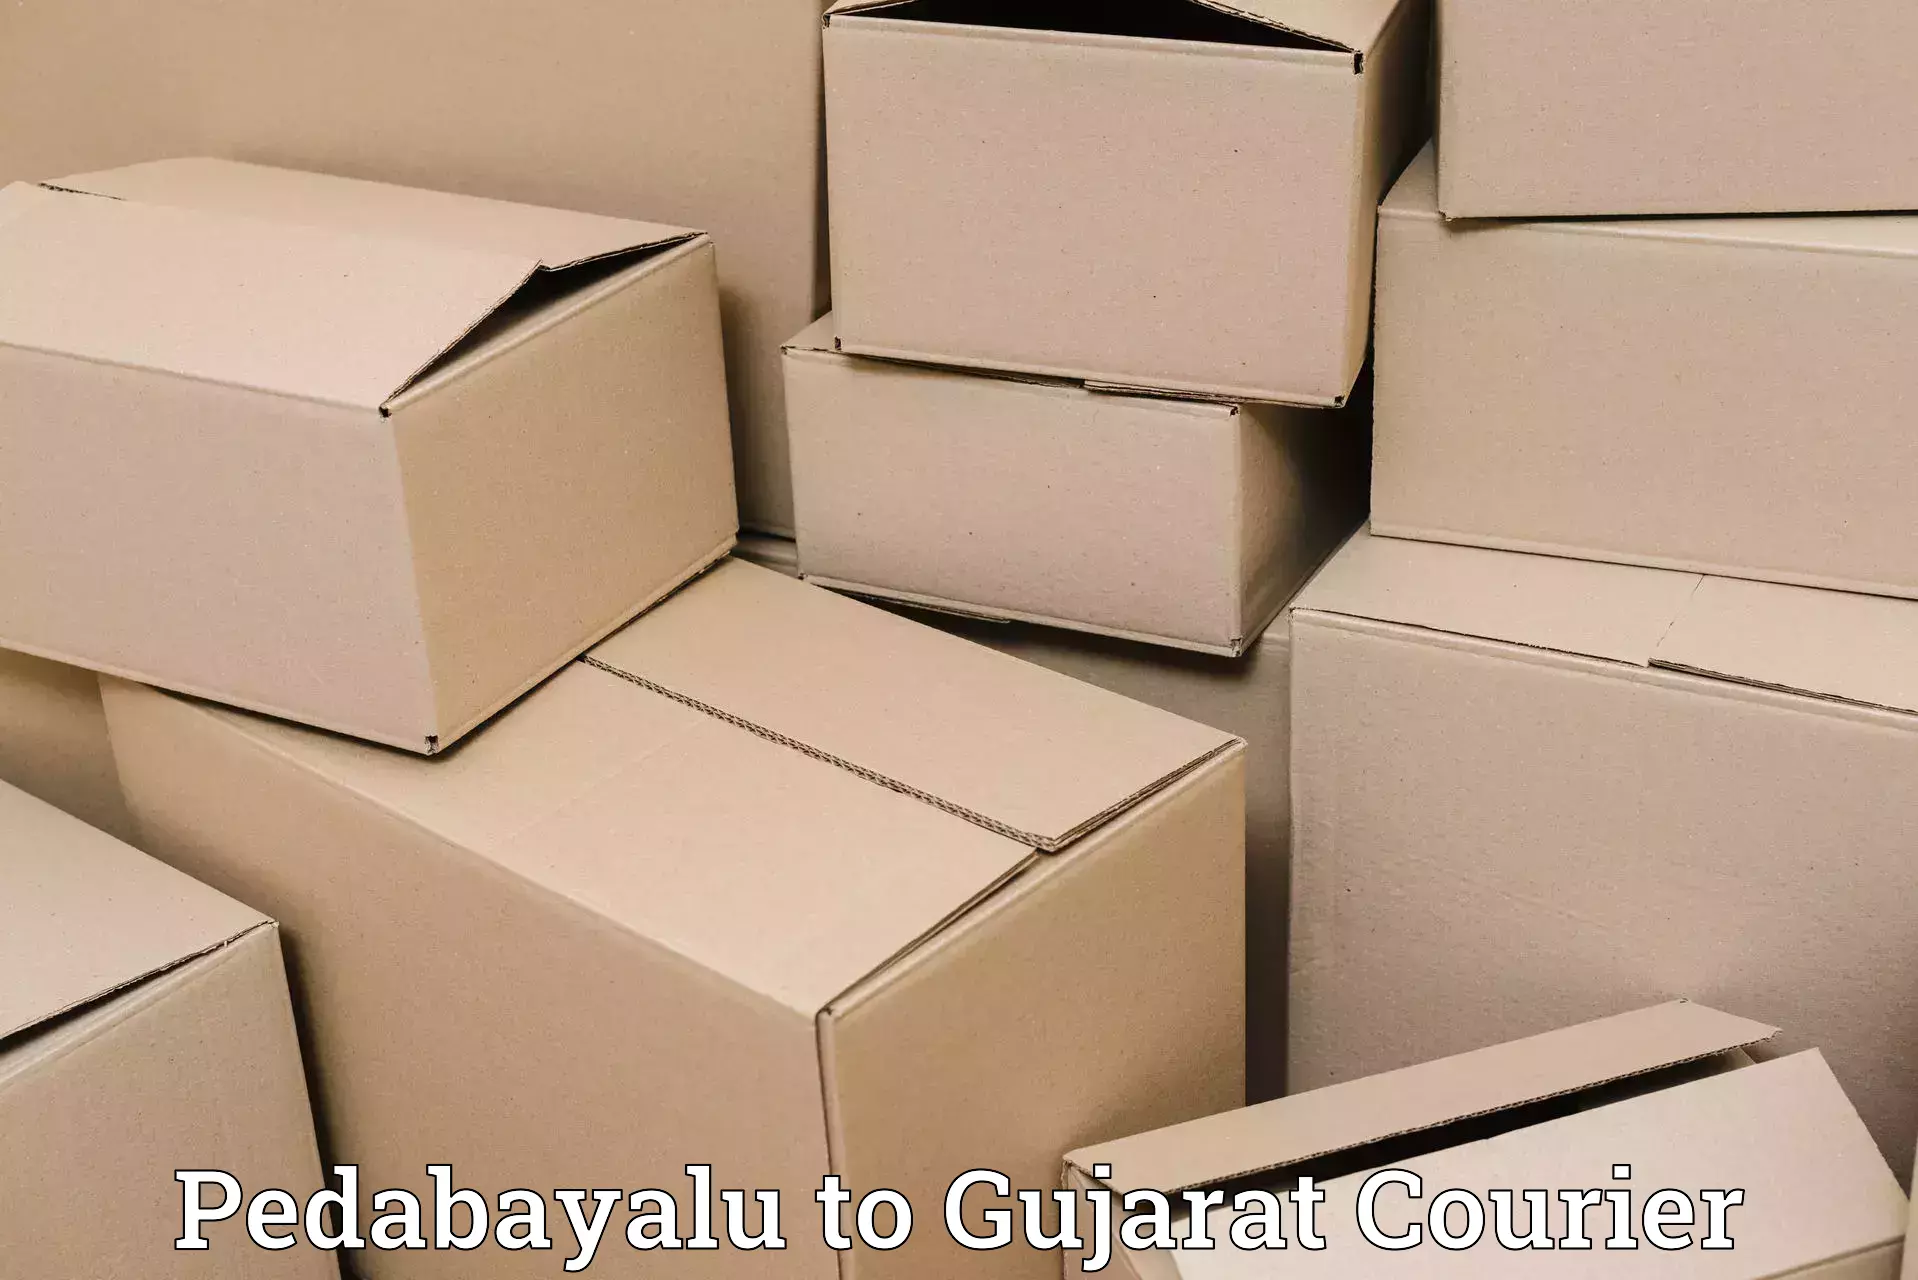 State-of-the-art courier technology Pedabayalu to Gujarat